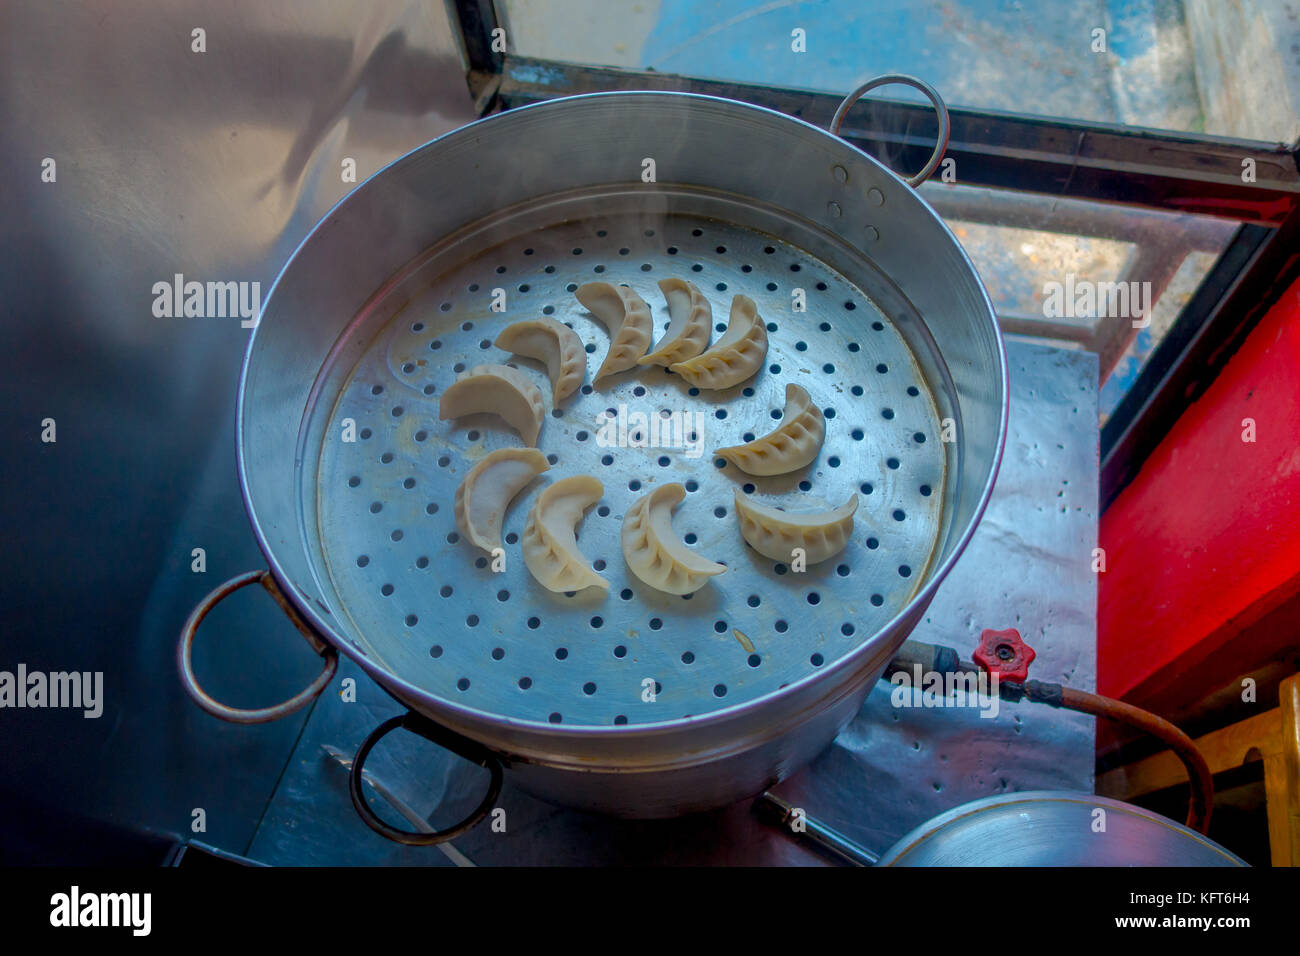 Top view of delicious momo food over a metallic tray in the kitchen, type of South Asian dumpling to Tibet, Nepal, Bhutan and Sikkim Nepal Stock Photo - Alamy